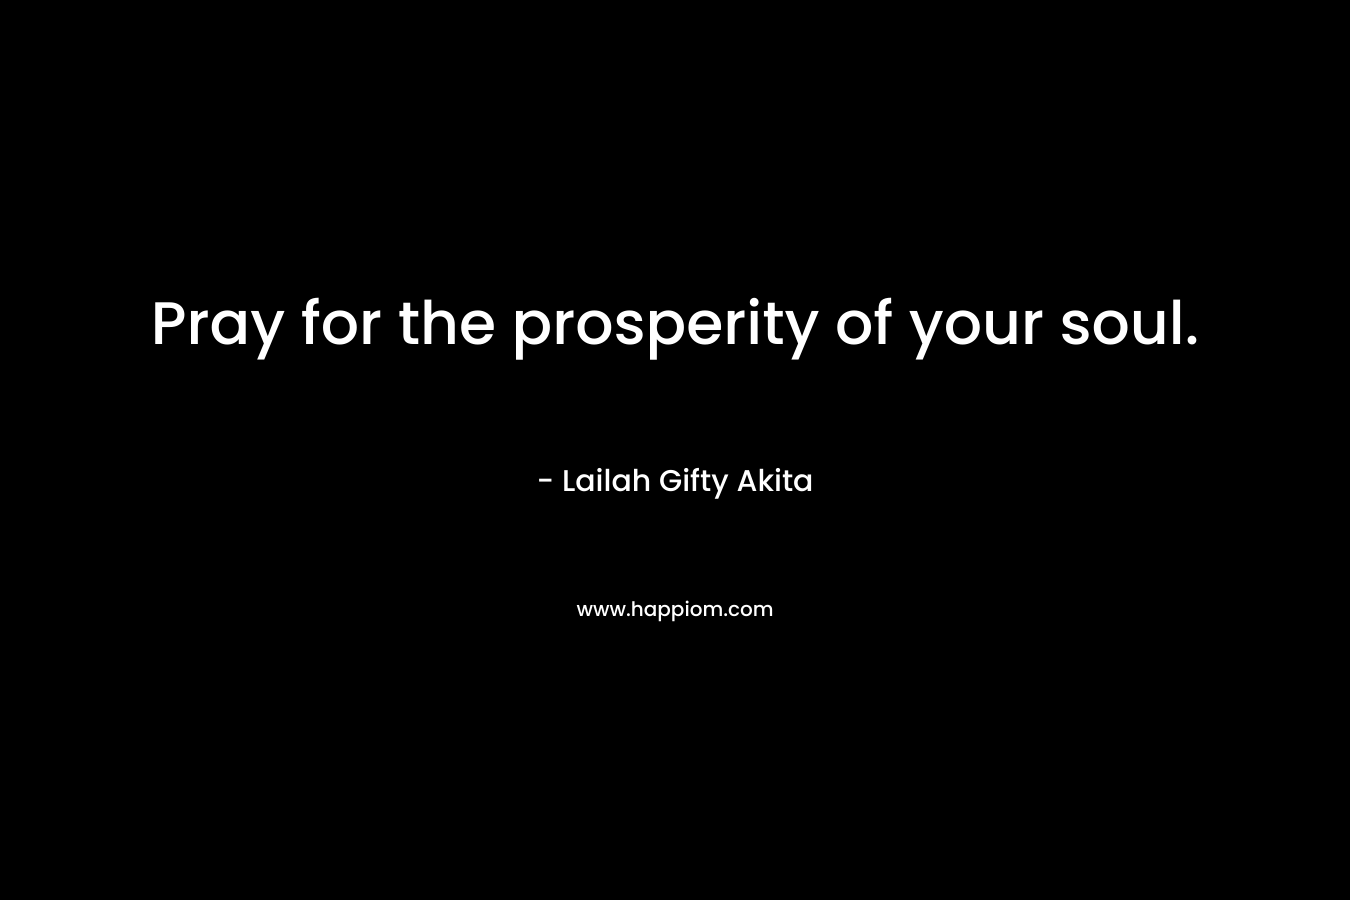 Pray for the prosperity of your soul.